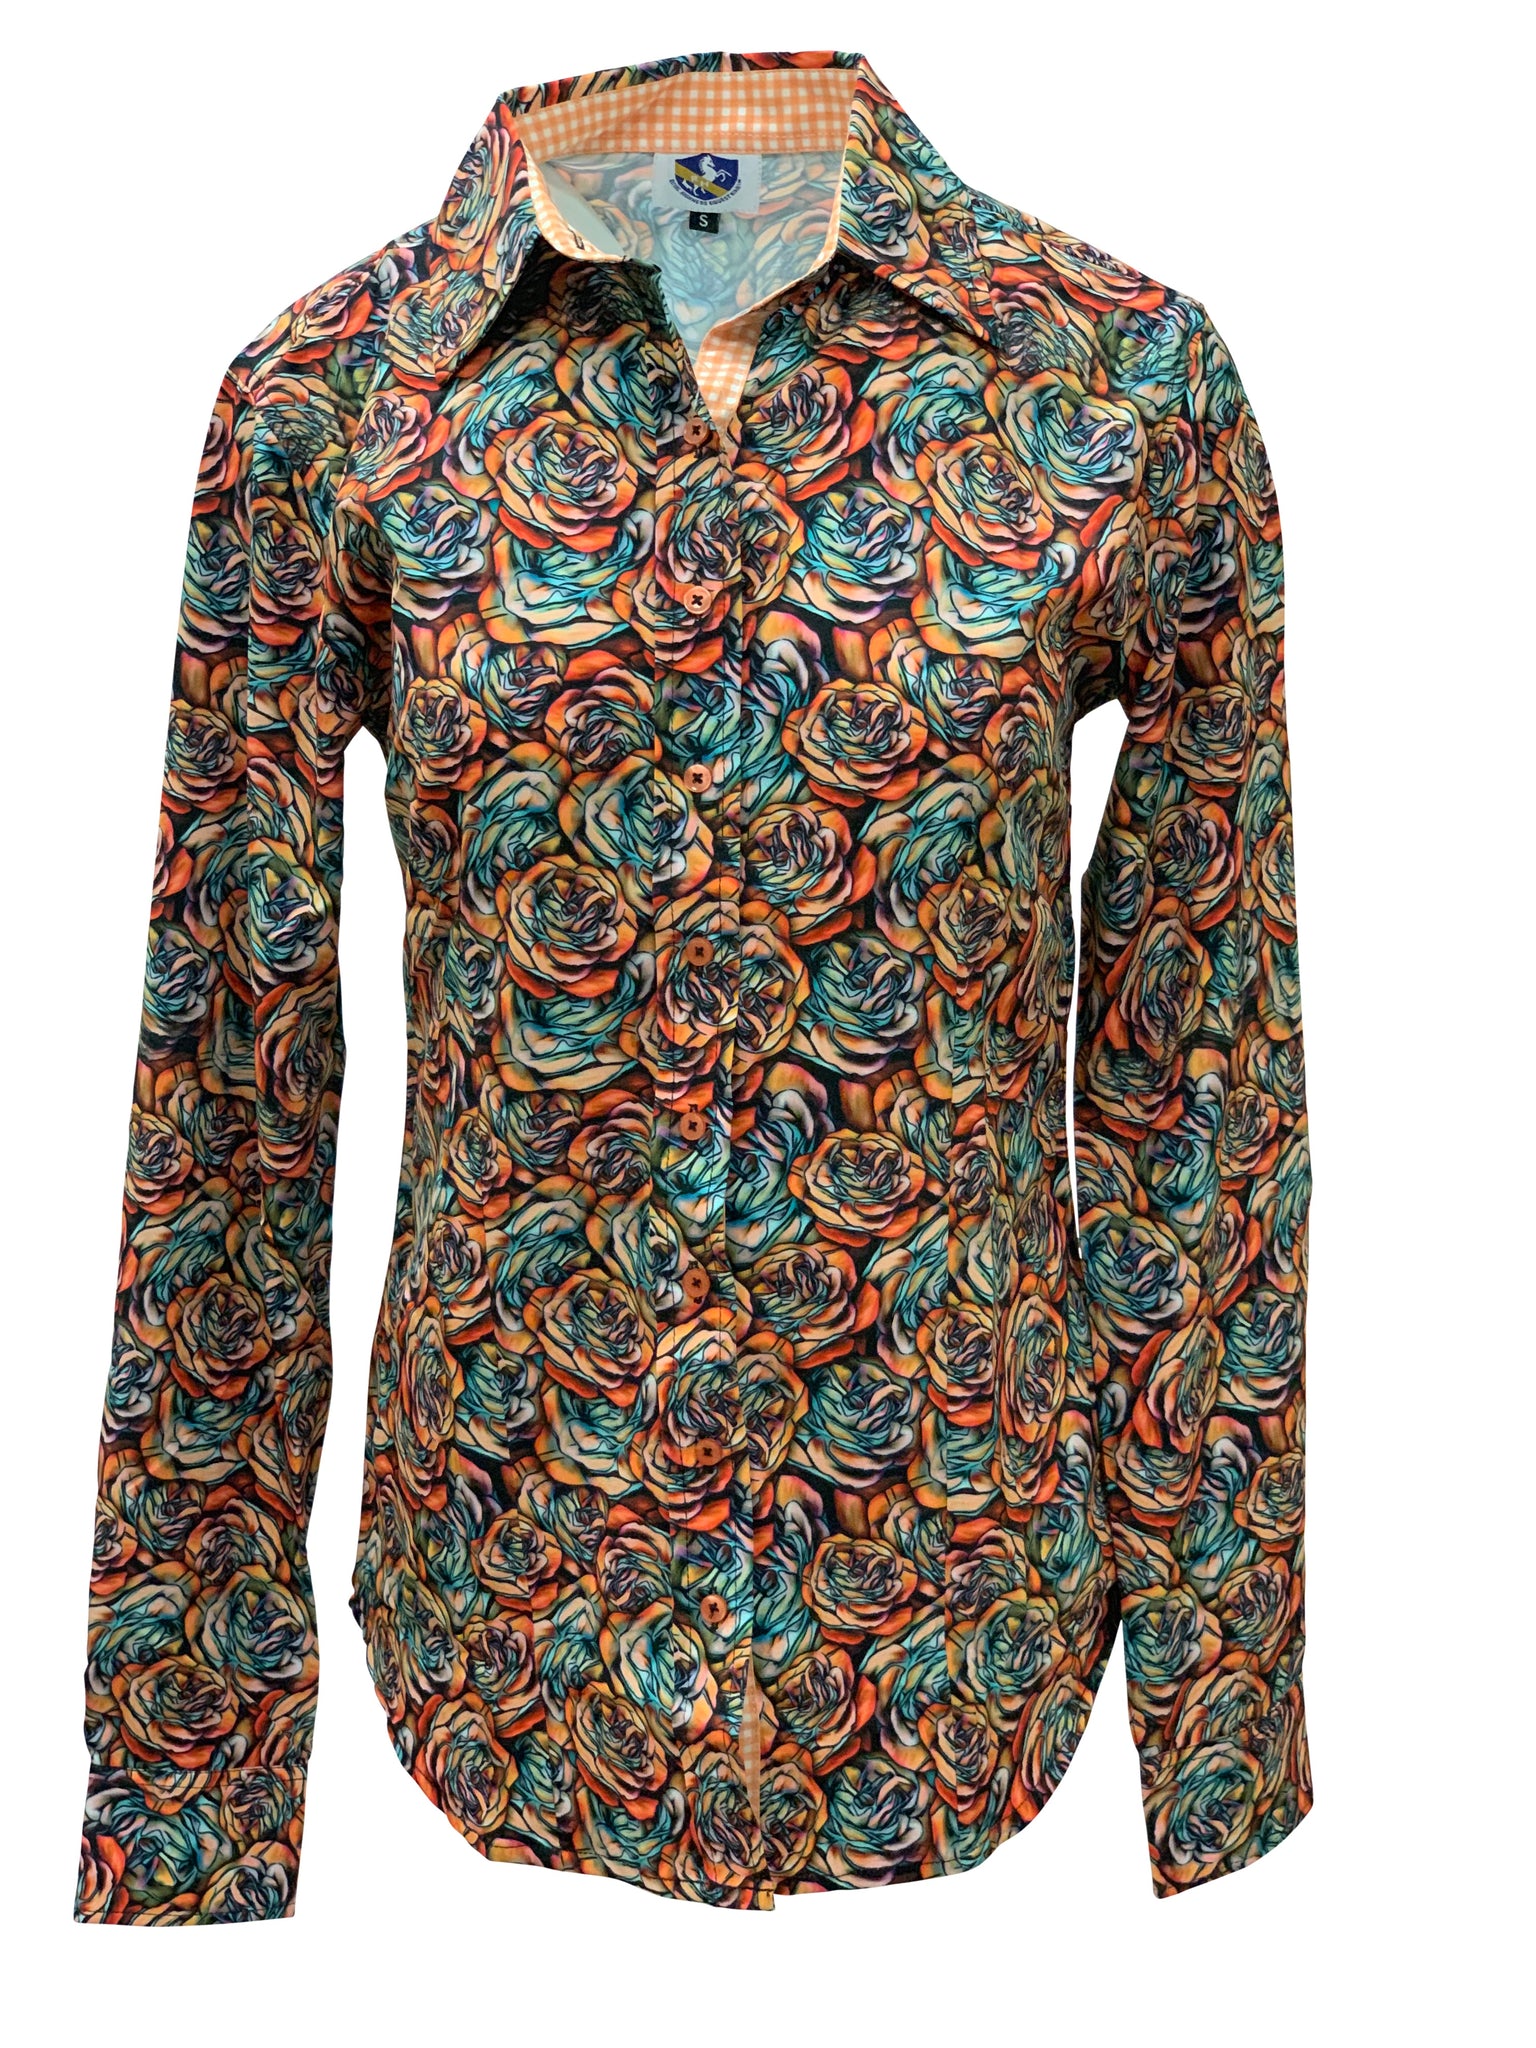 A Printed Fitted Button Down - Western Print